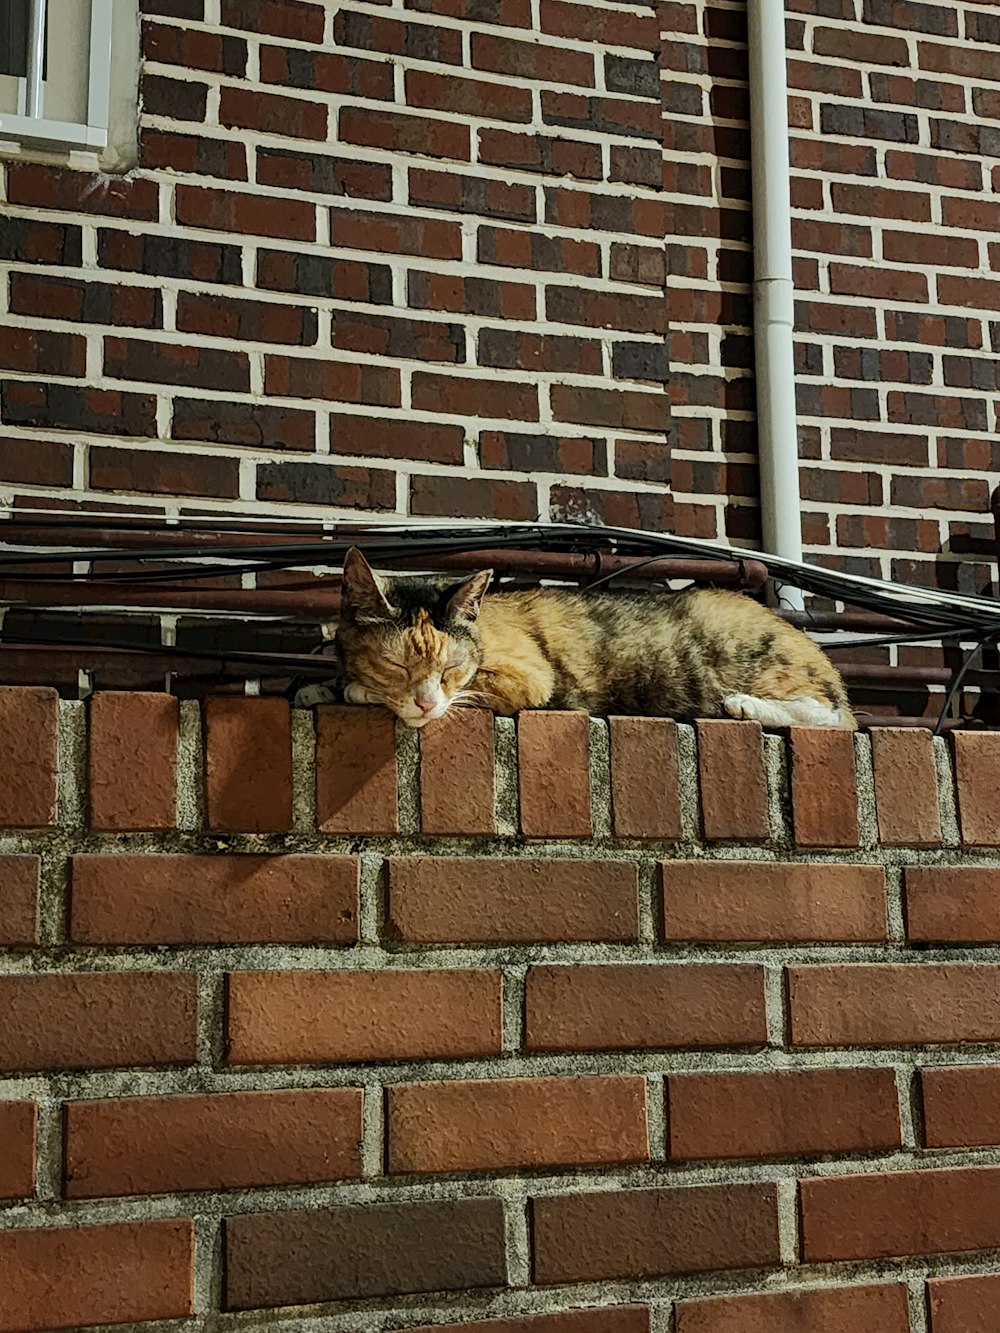 a cat sleeping on top of a brick wall